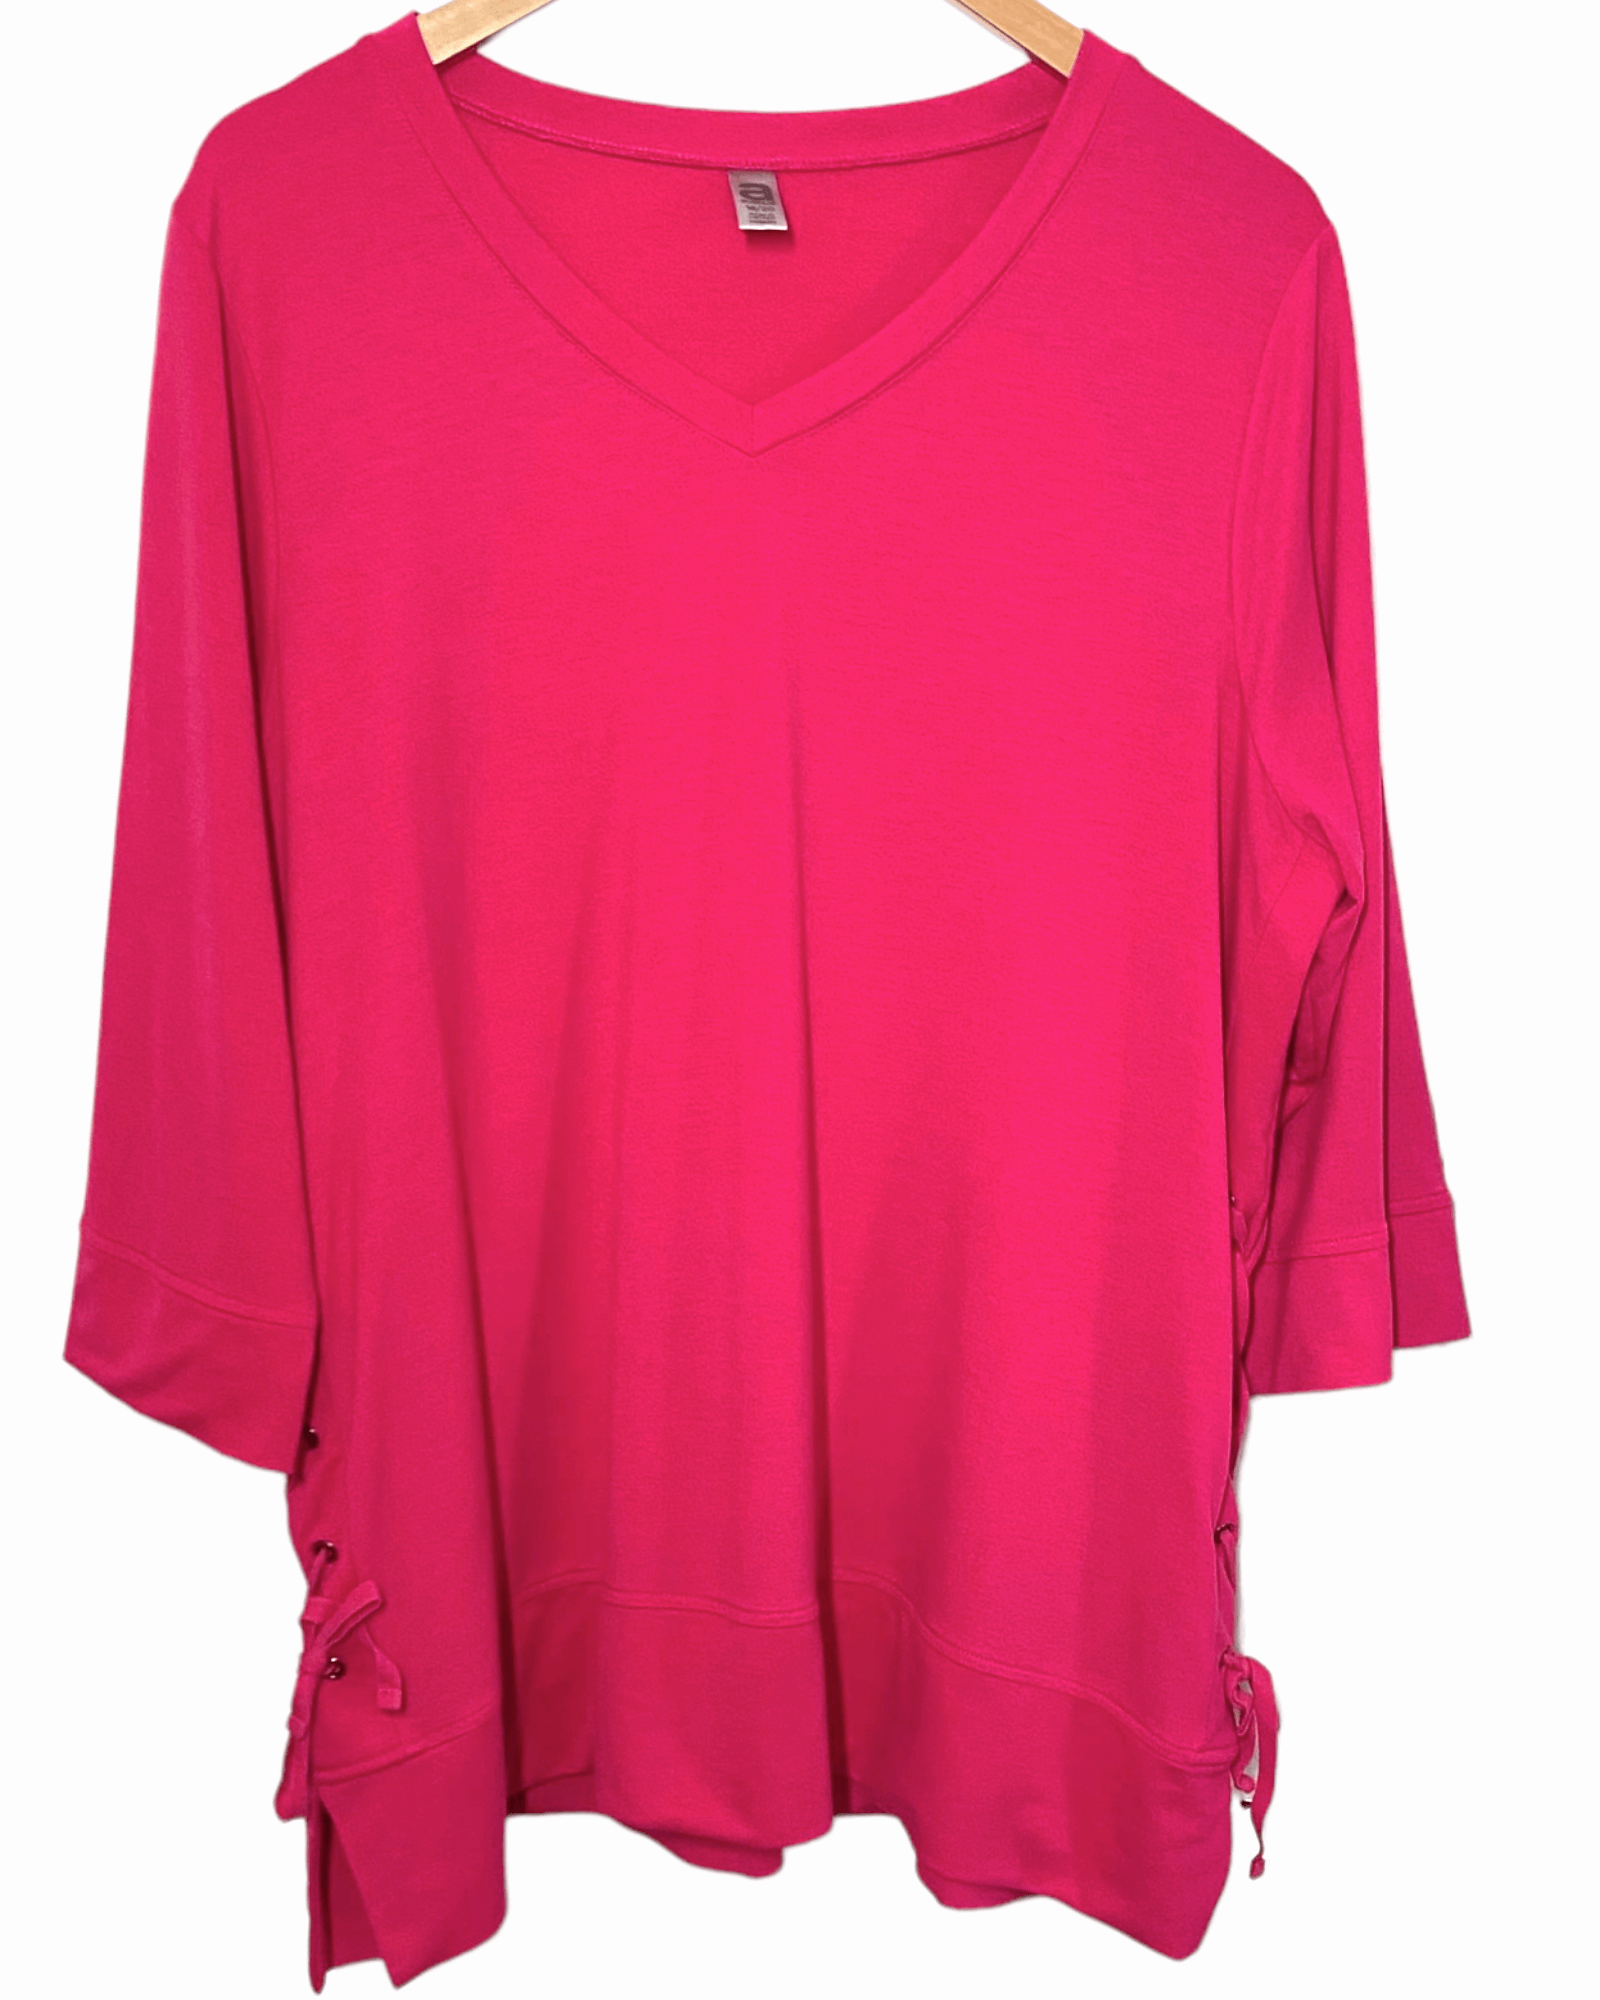 Light Summer A AVENUE freesia pink v-neck grommet lace-up top